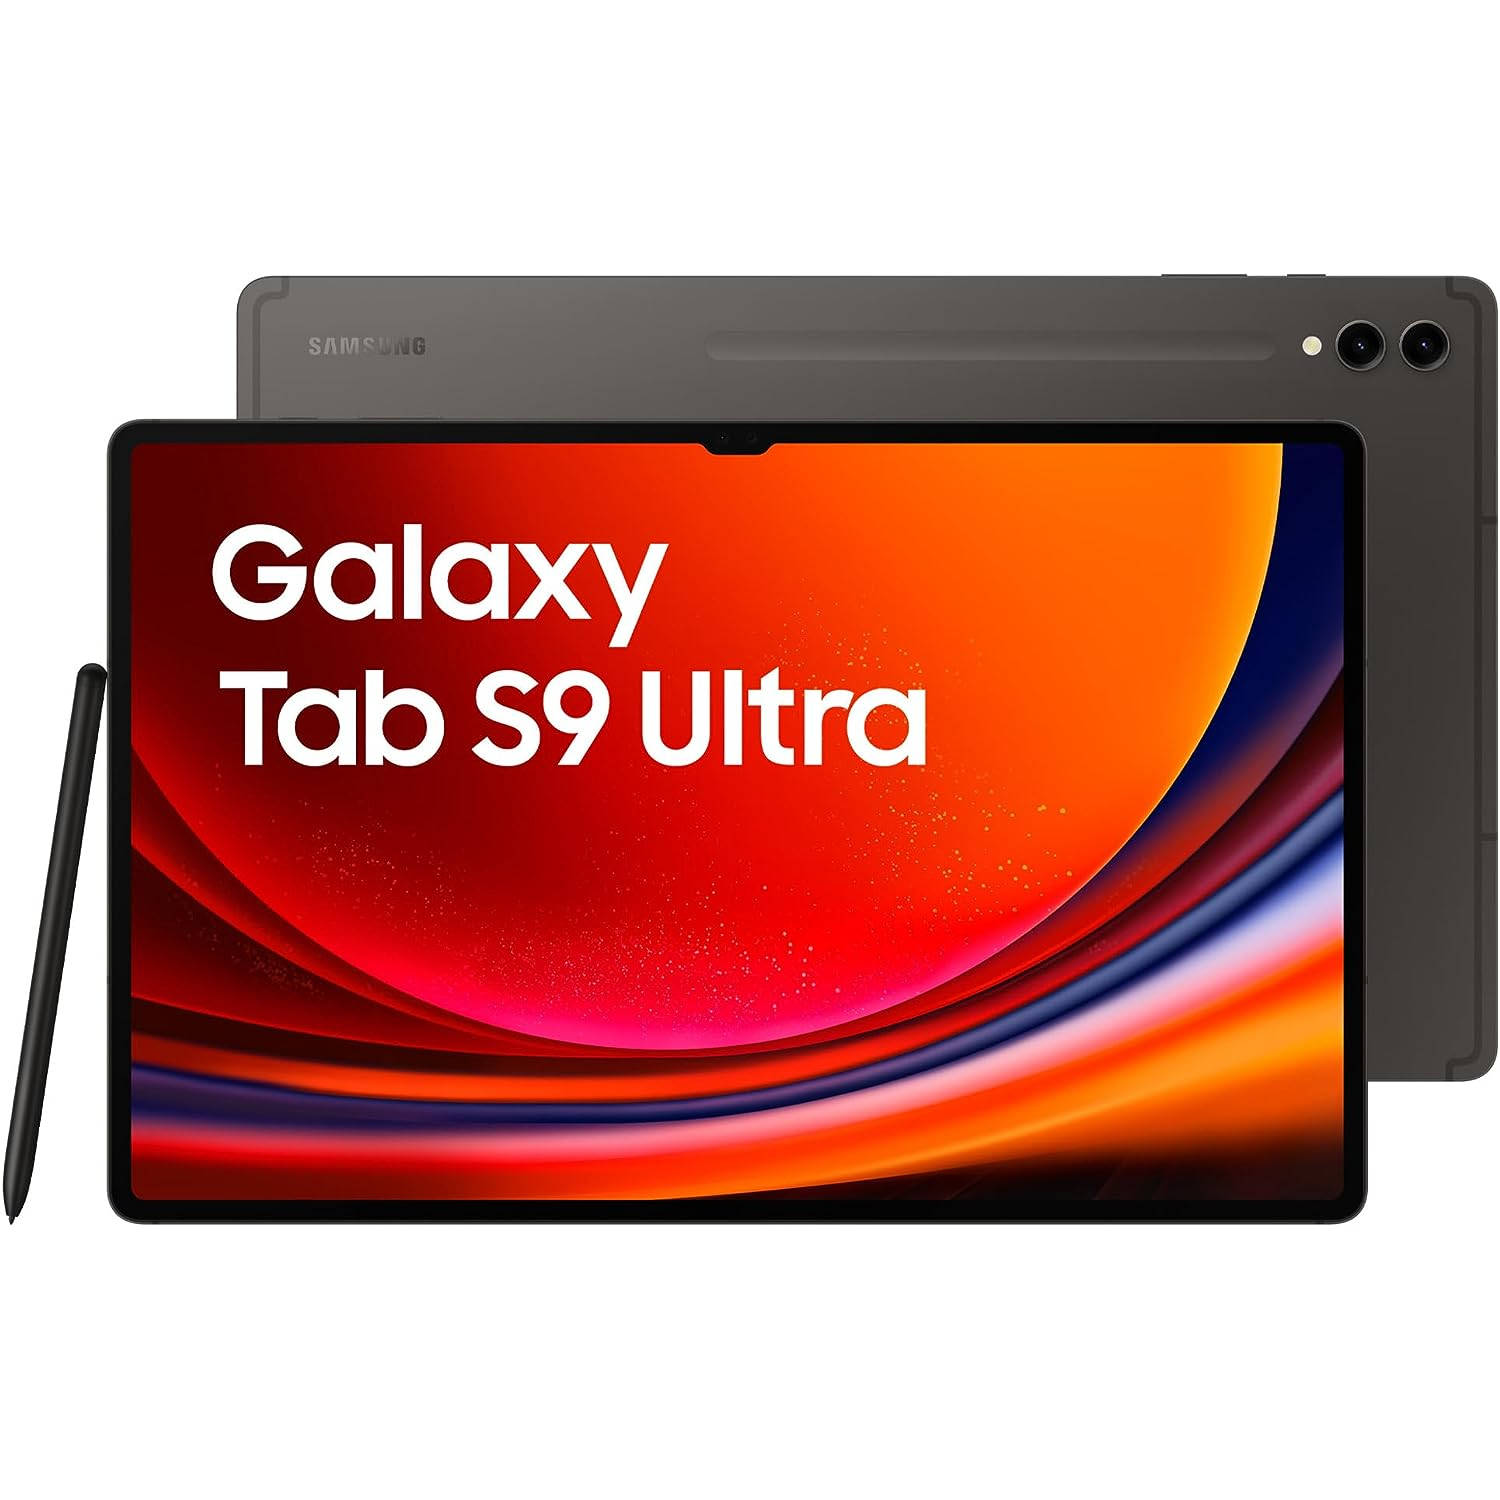 Samsung Galaxy Tab S9 Ultra LTE-4G, 5G, WiFi 1 TB Grafiet Android tablet 37.1 cm (14.6 inch) 2.0 GHz